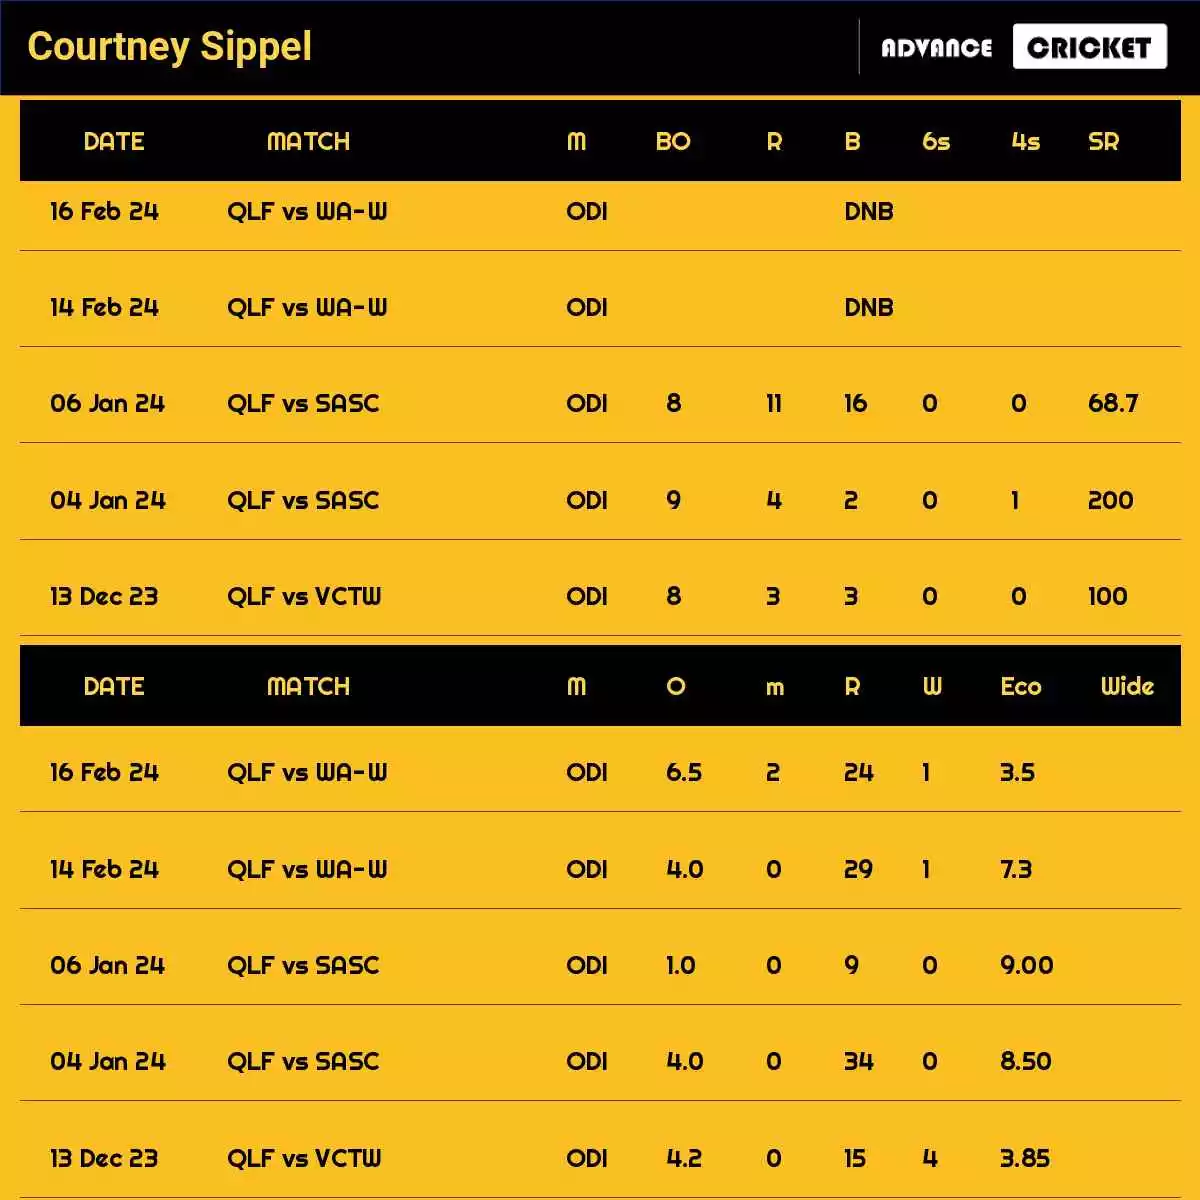 Courtney Sippel Recent Matches Details Date Wise